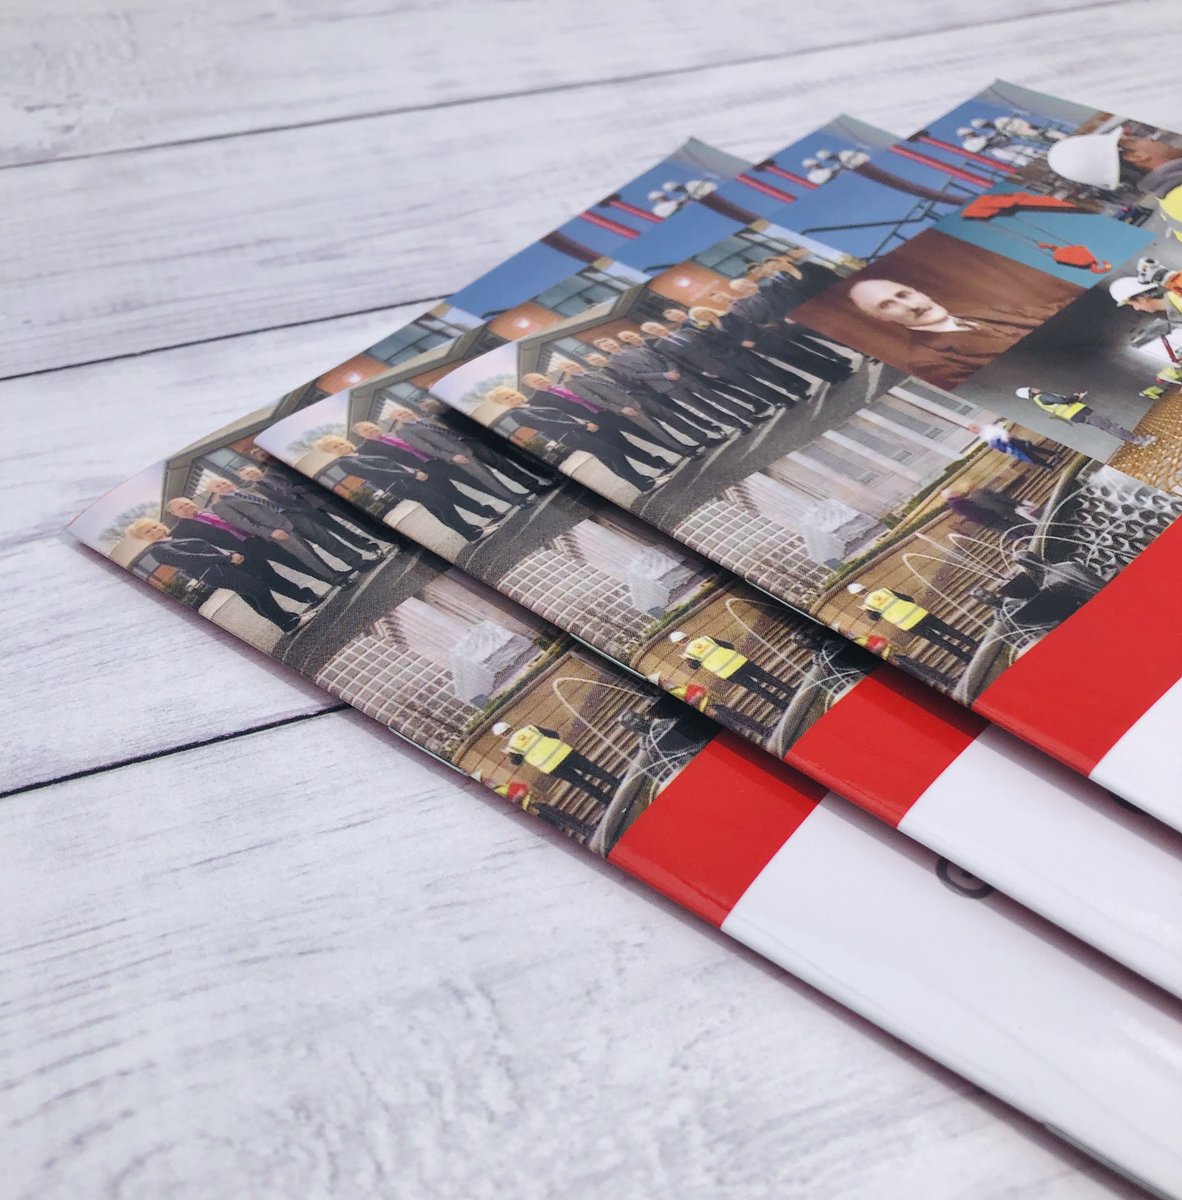 Send personalised brochures out to your prospective clients... super quick turnaround, all printed & finished in-house by Team Purely 👍

#TeamPurely #brochures #marketing #saddlestitched #printfinishing #personalisation #PurelyPrintExperts #Derby #DerbyPrinter #SpreadingTheLove